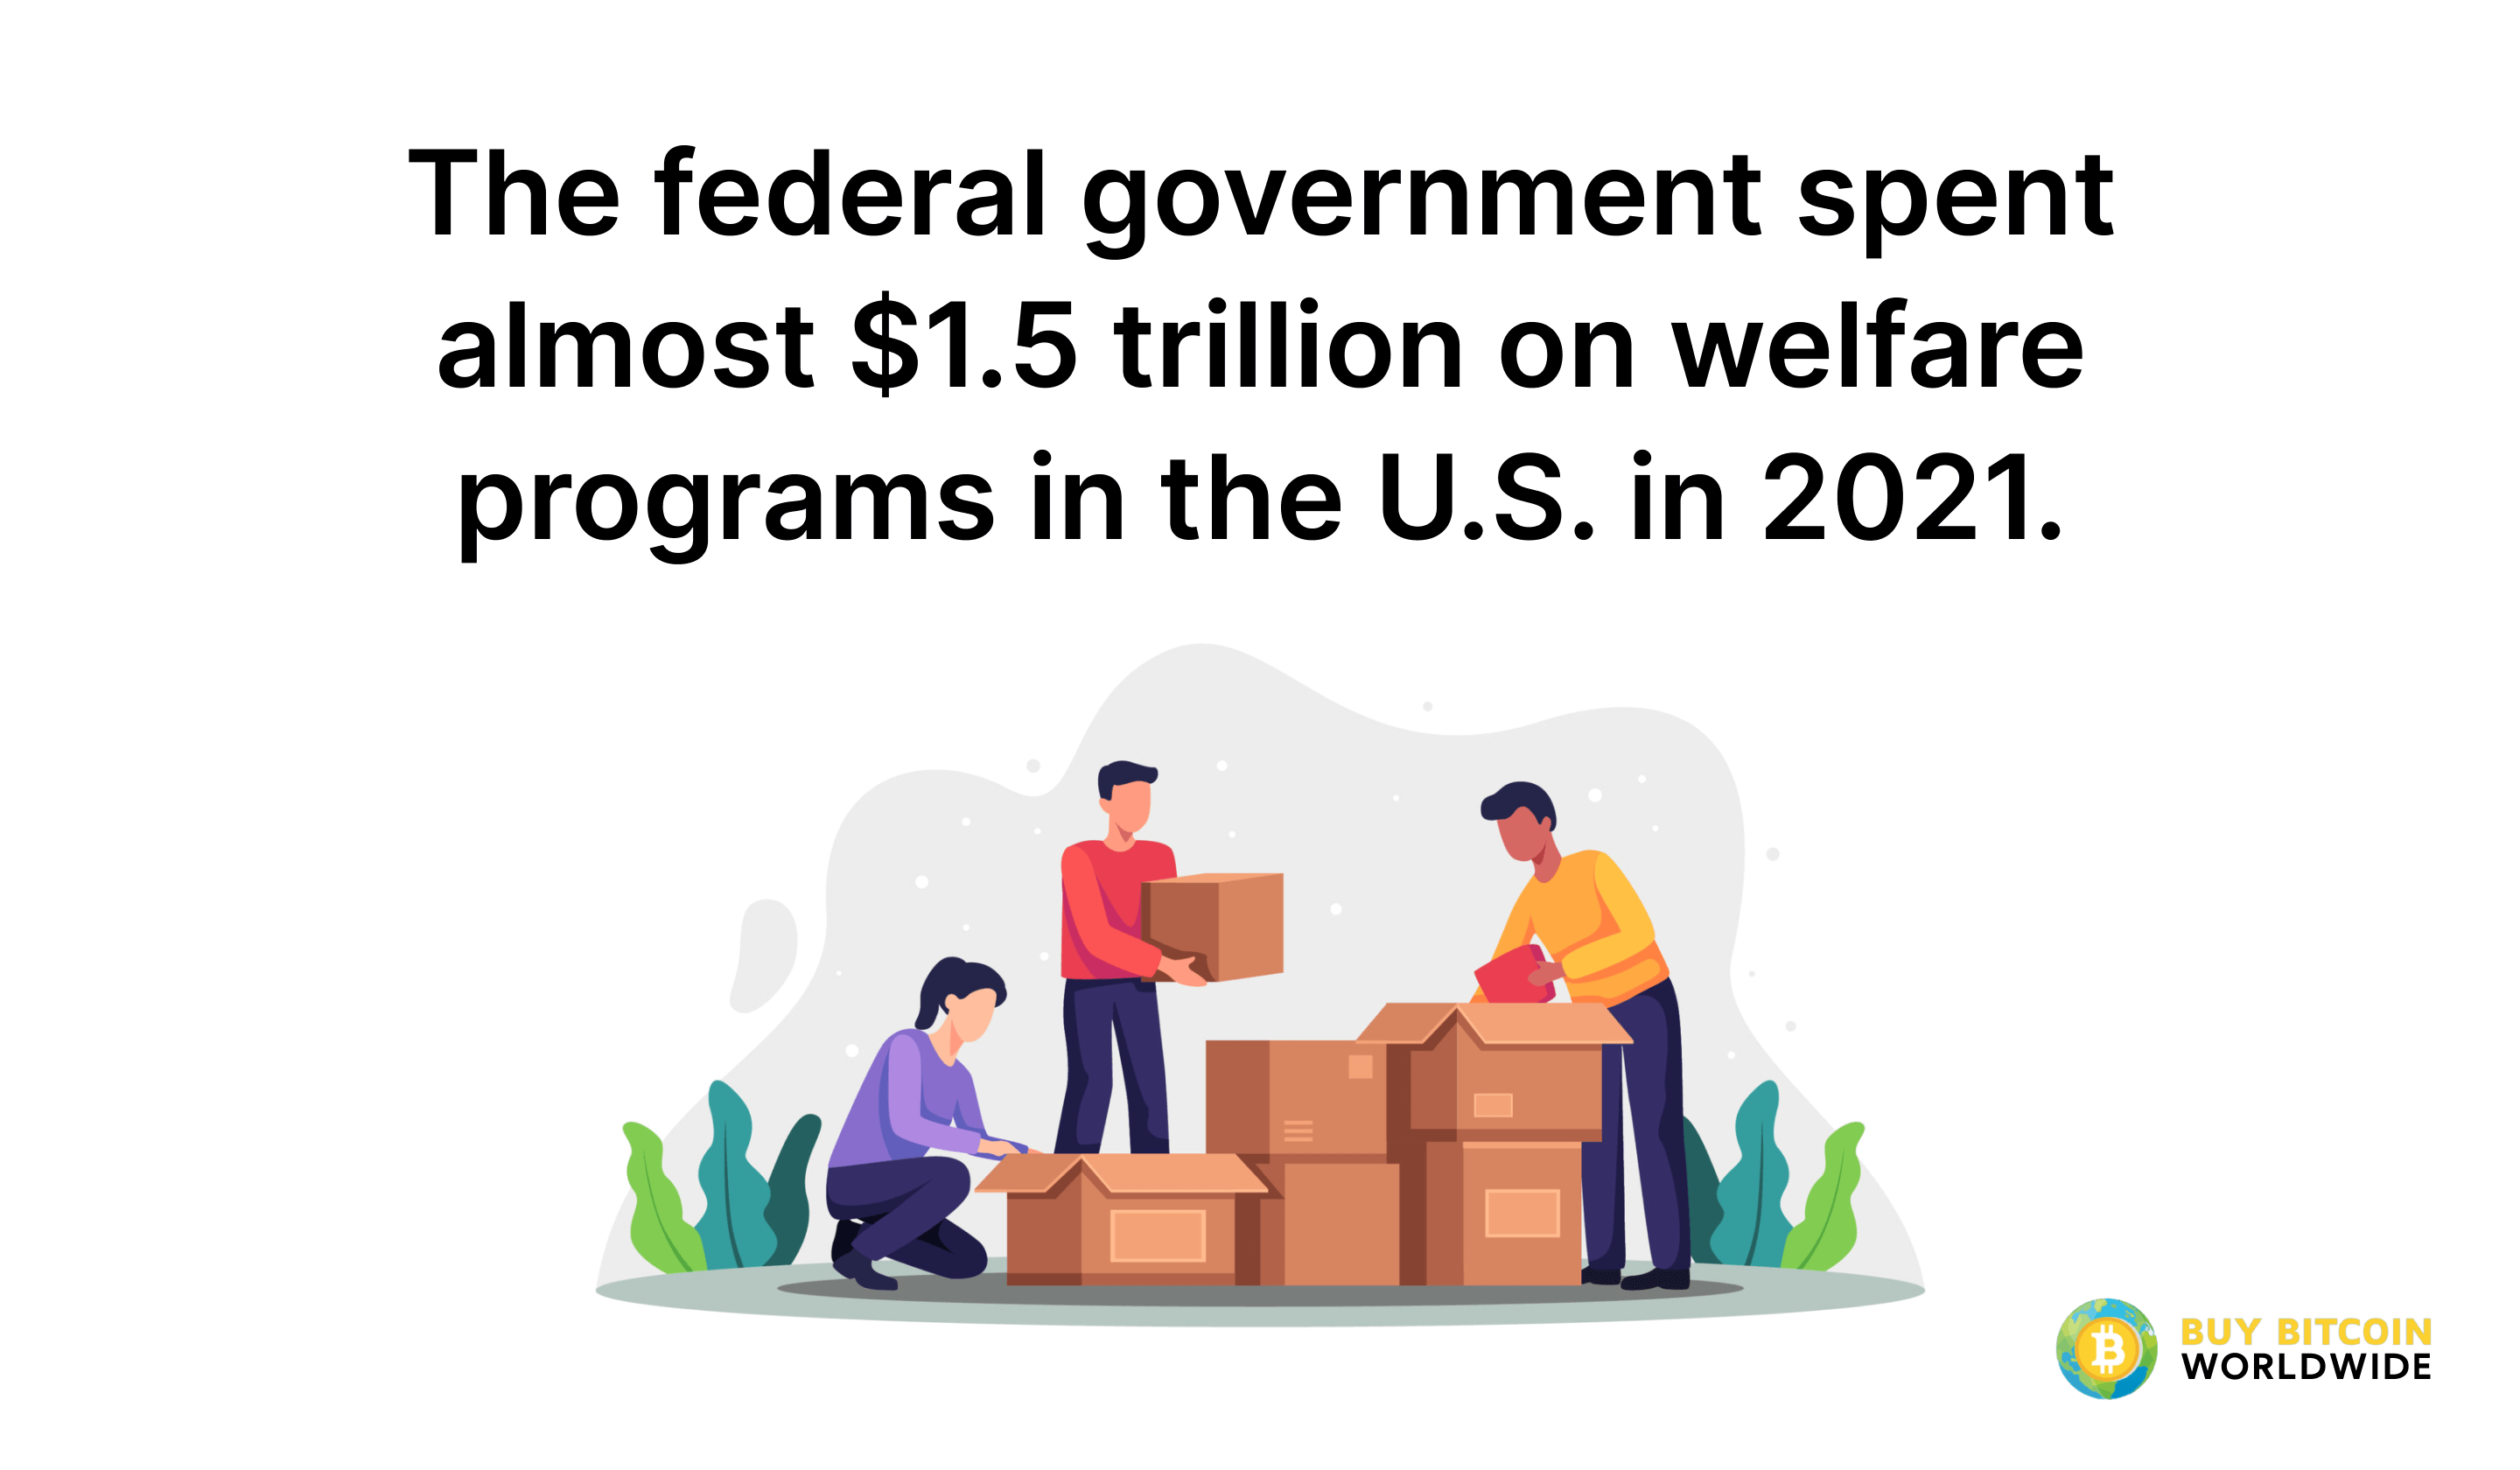 federal government spending on welfare